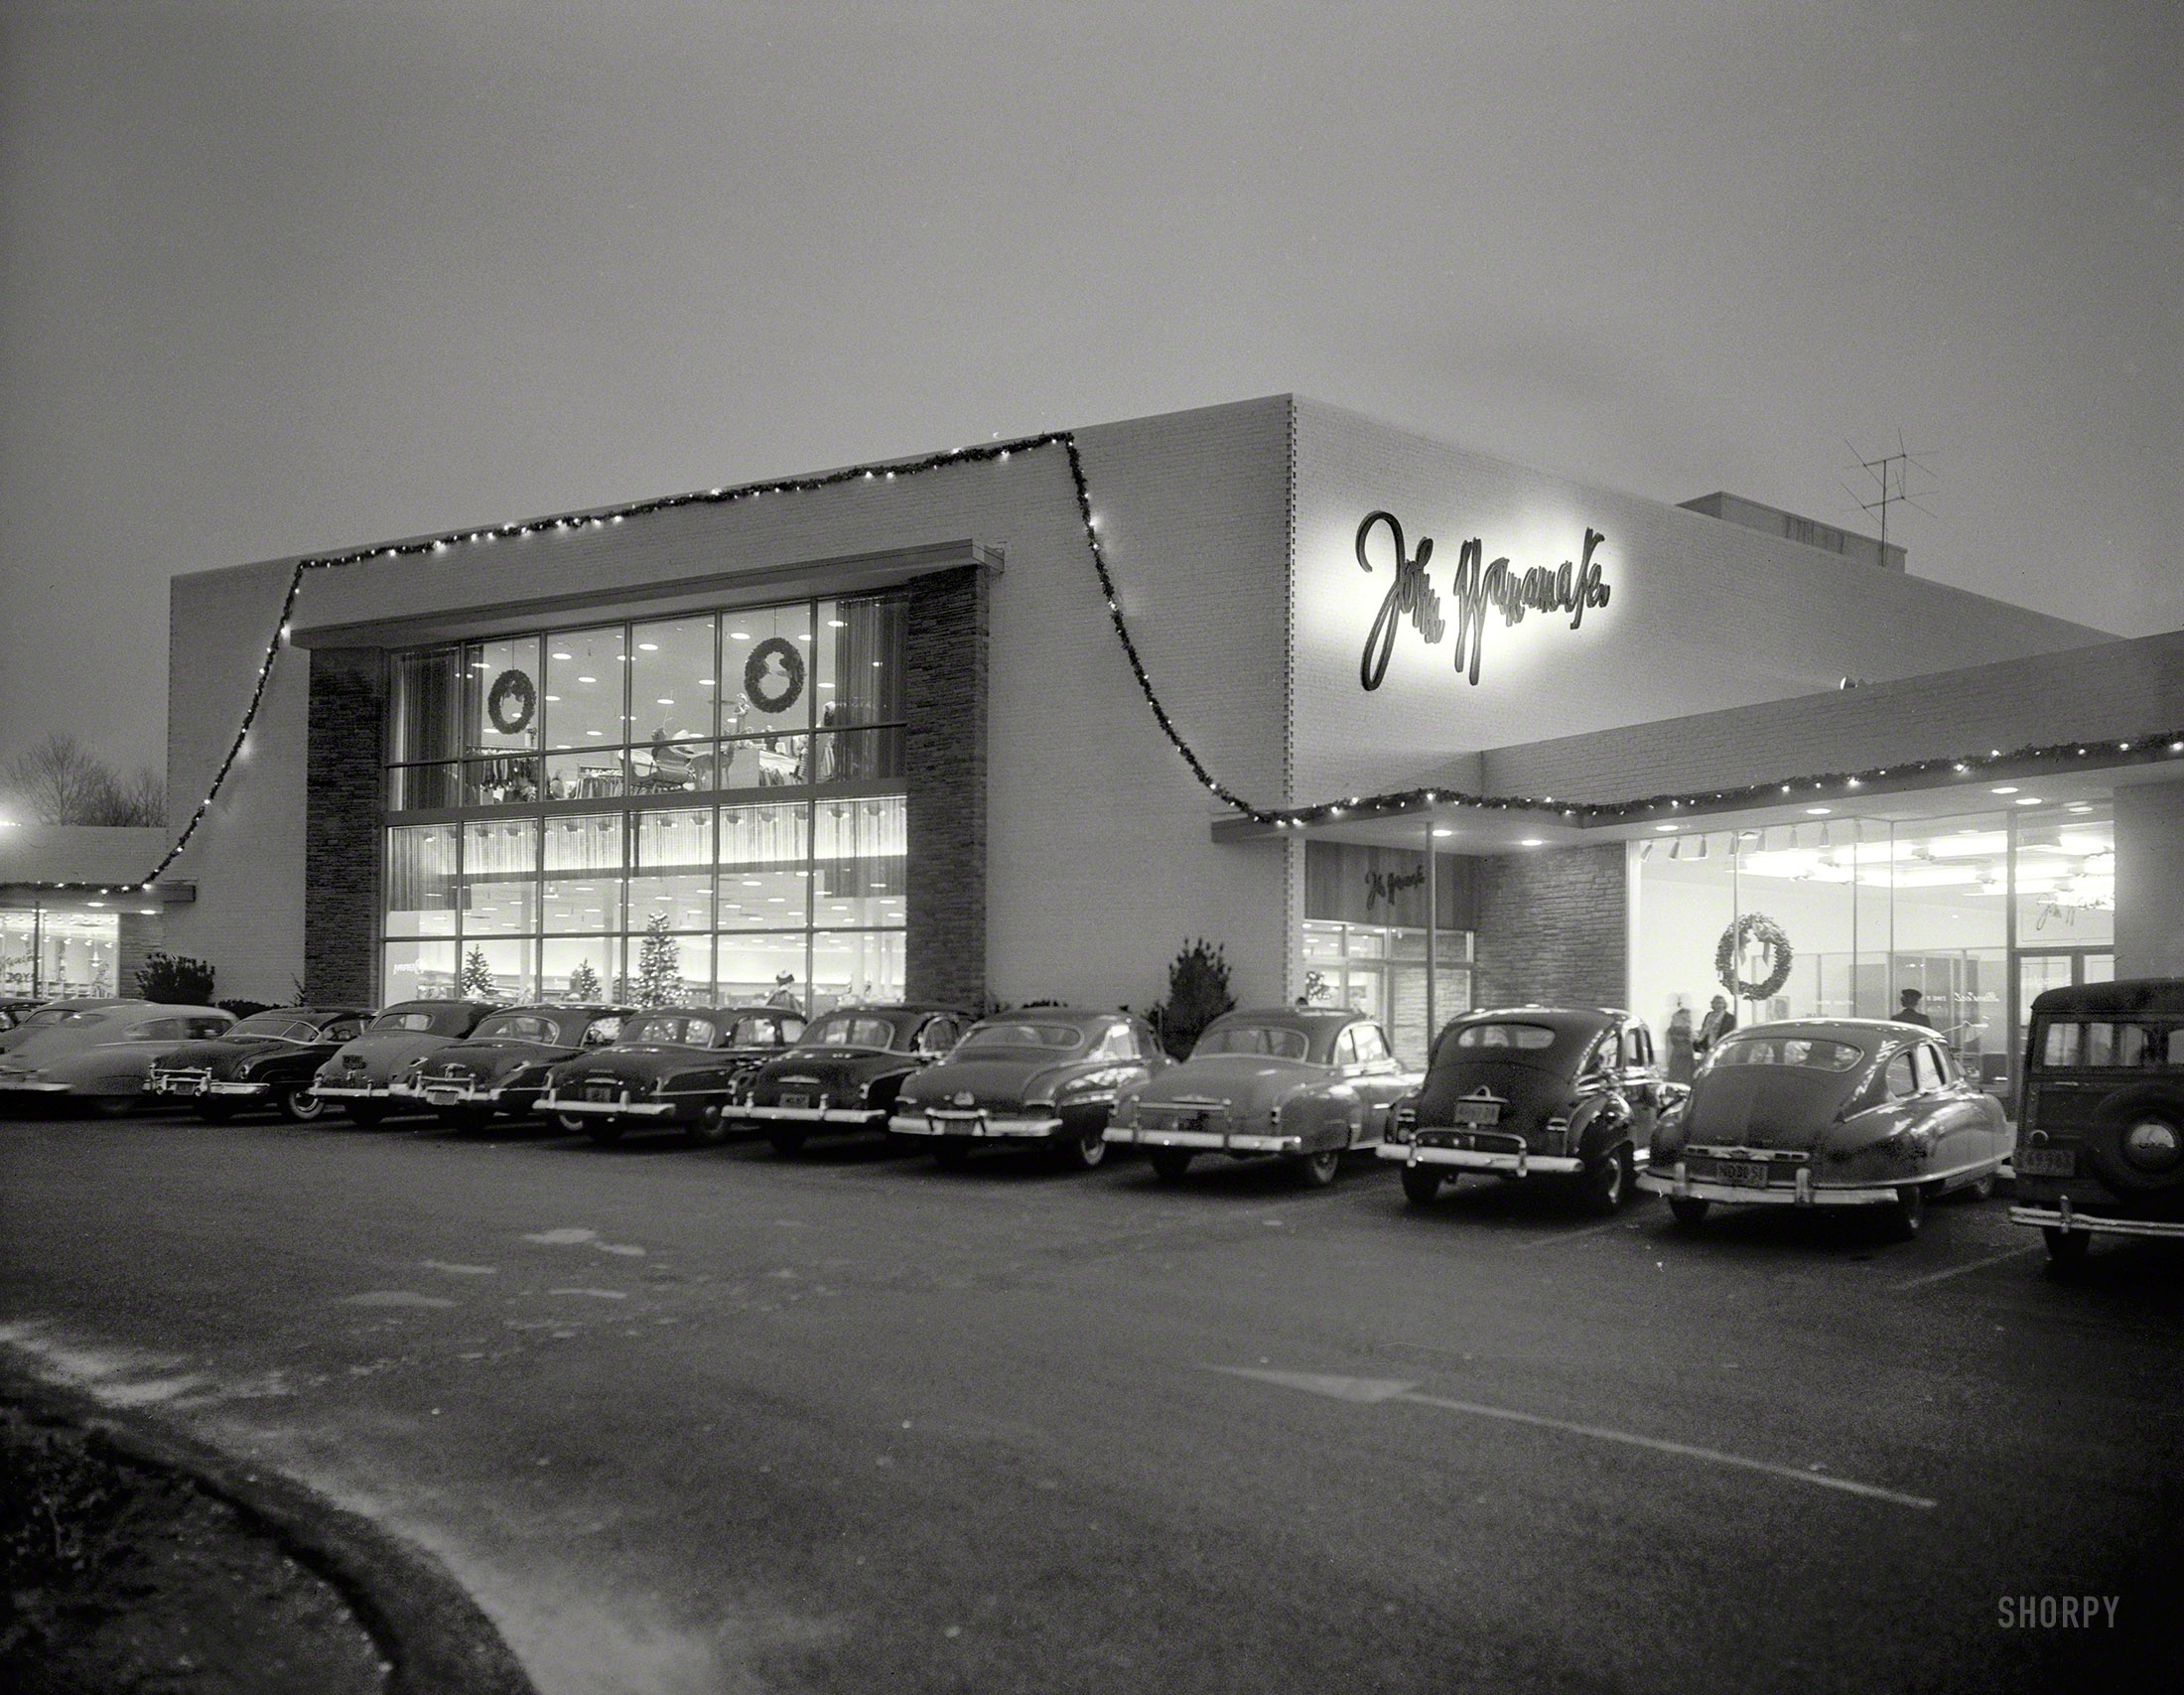 &nbsp; &nbsp; &nbsp; &nbsp; As an alternative to Black Friday, we present Gray Saturday. More specifically, the first day of December 62 years ago:

Dec. 1, 1951. "Shopping center, Great Neck, Long Island, New York. Wanamaker's." Large-format negative by Gottscho-Schleisner. View full size.